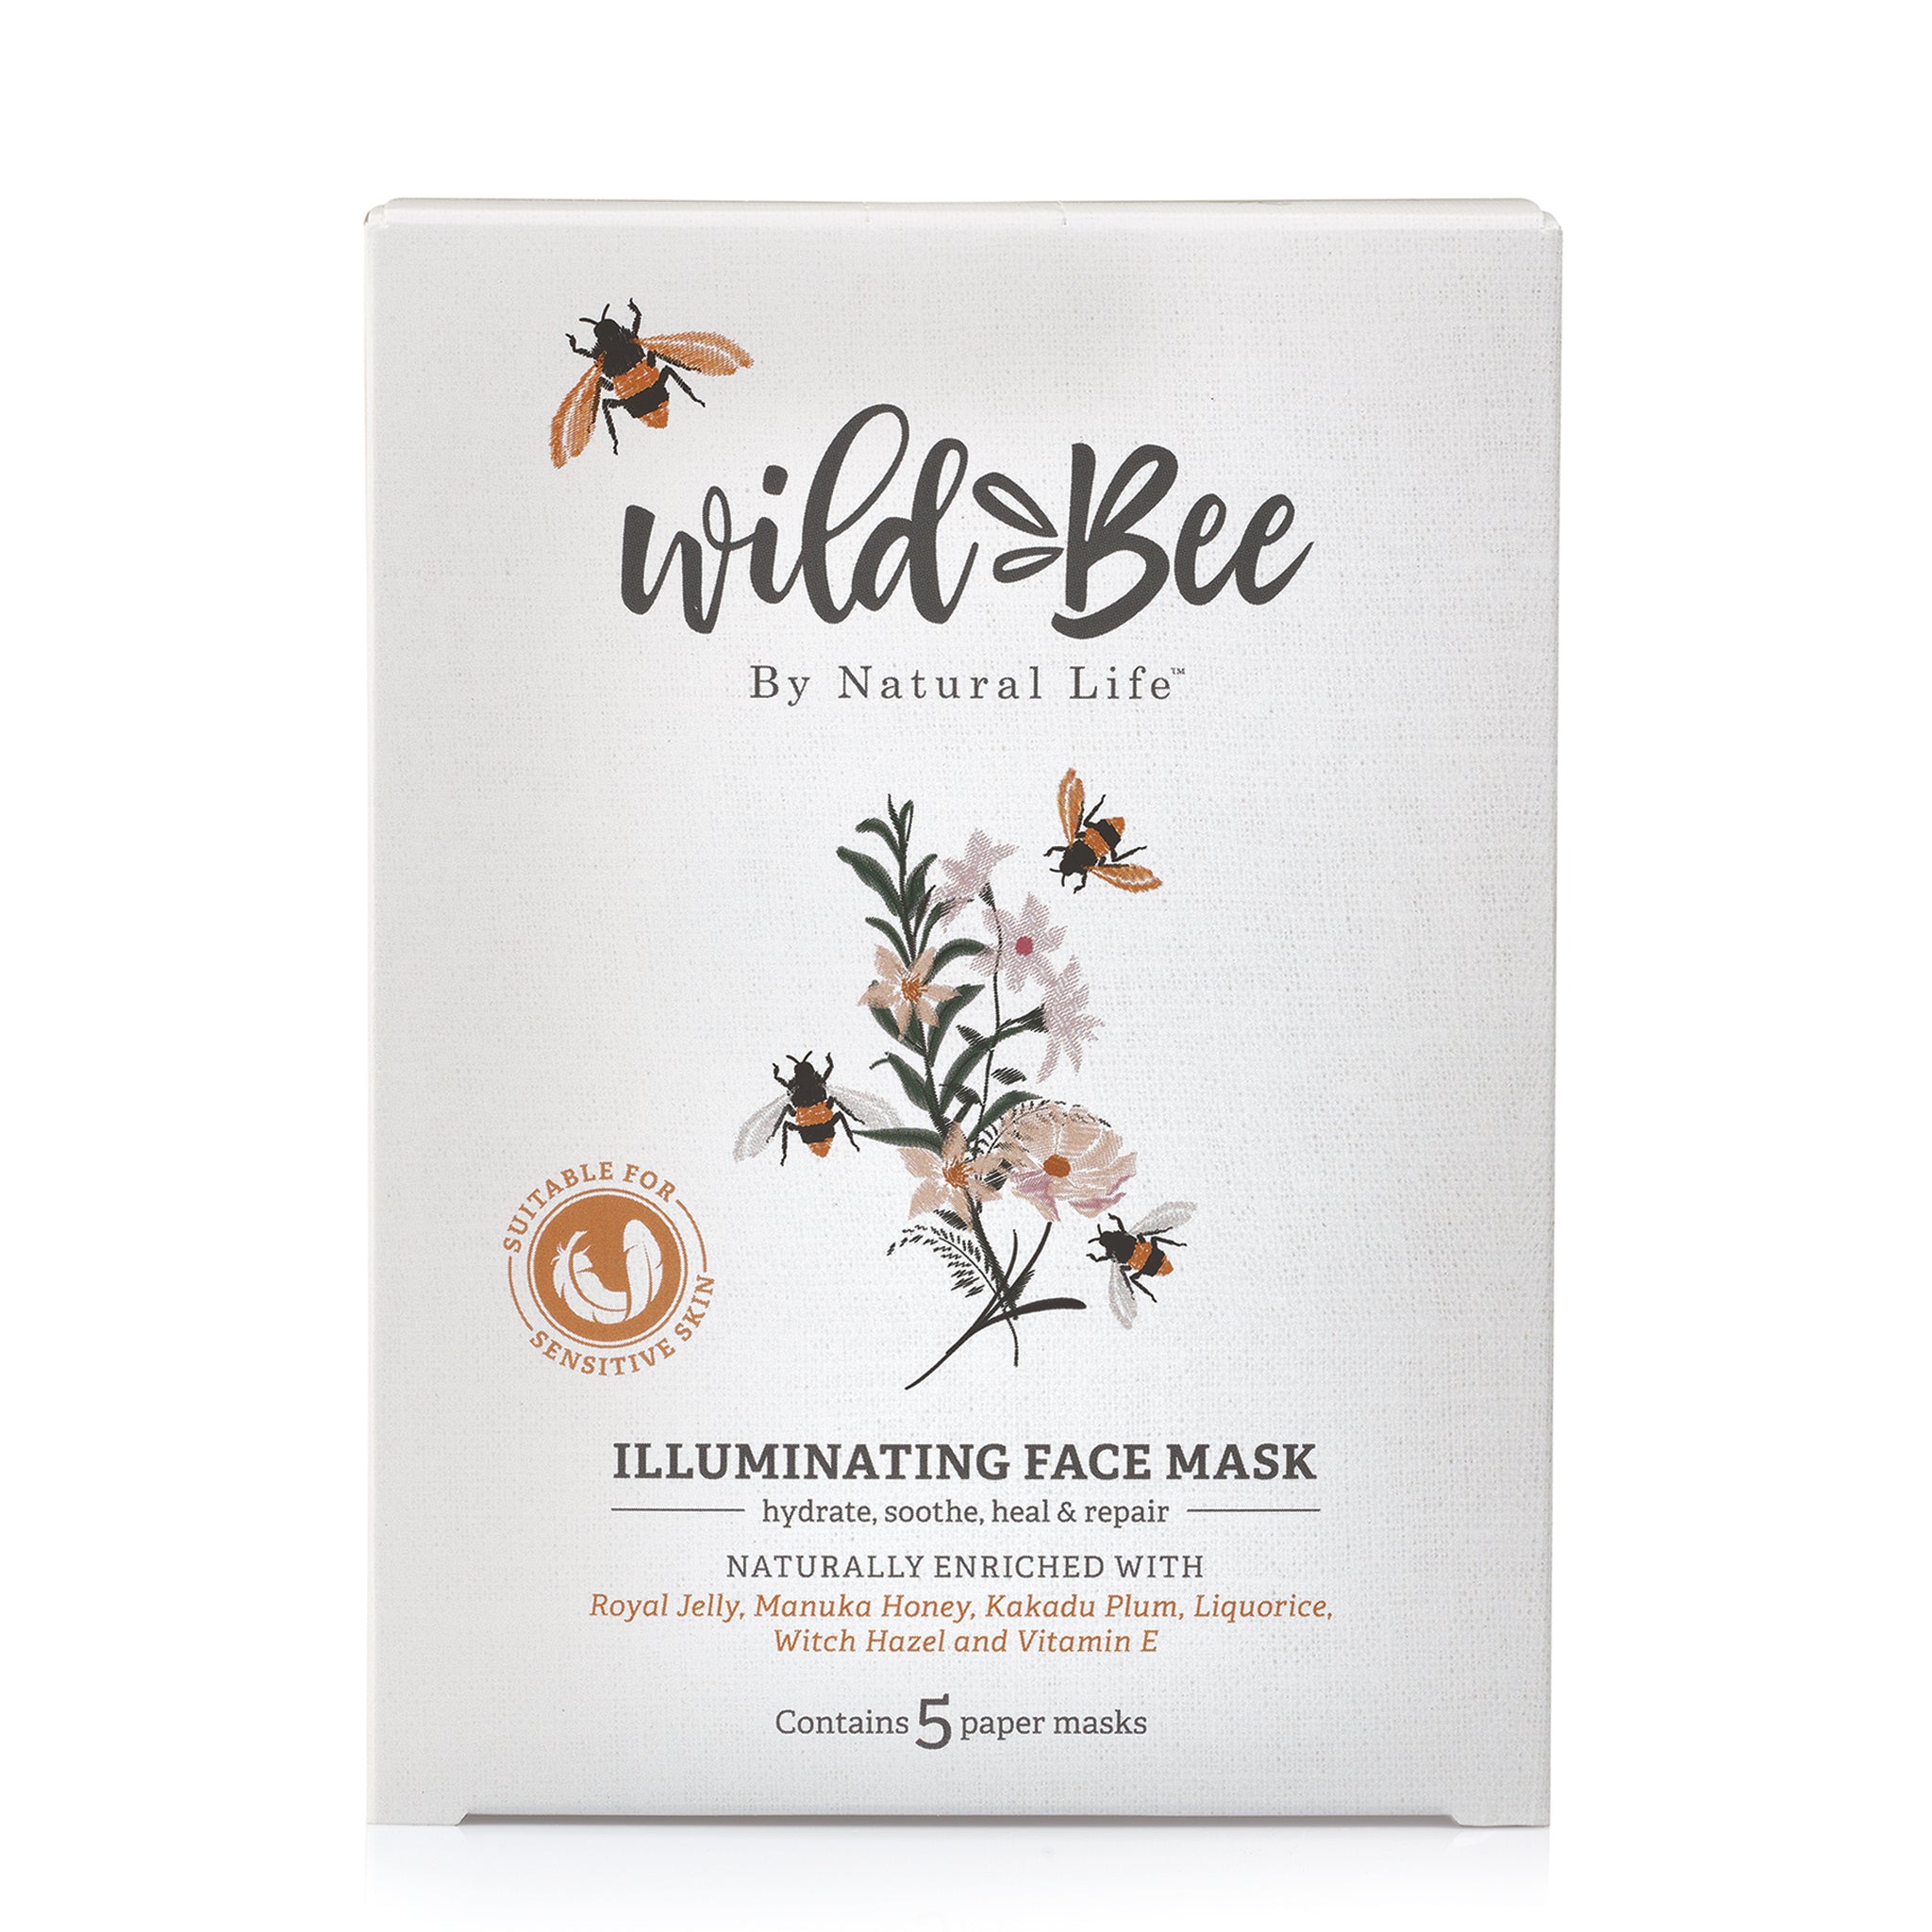 Wild Bee by Natural Life Illuminating Face Mask - 5 Pack